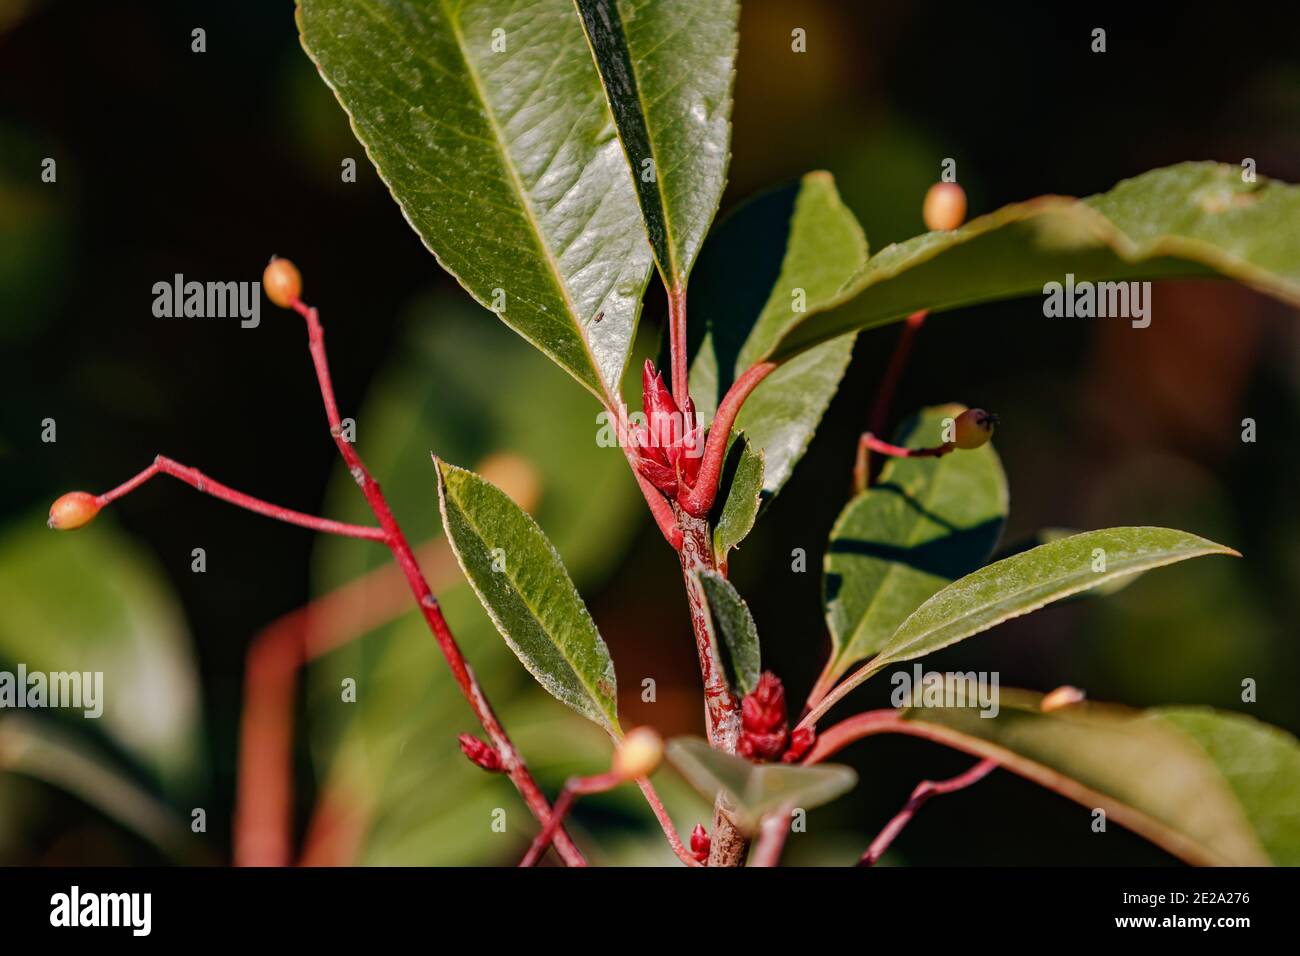 A glowing red bud of a hedge seedling Stock Photo